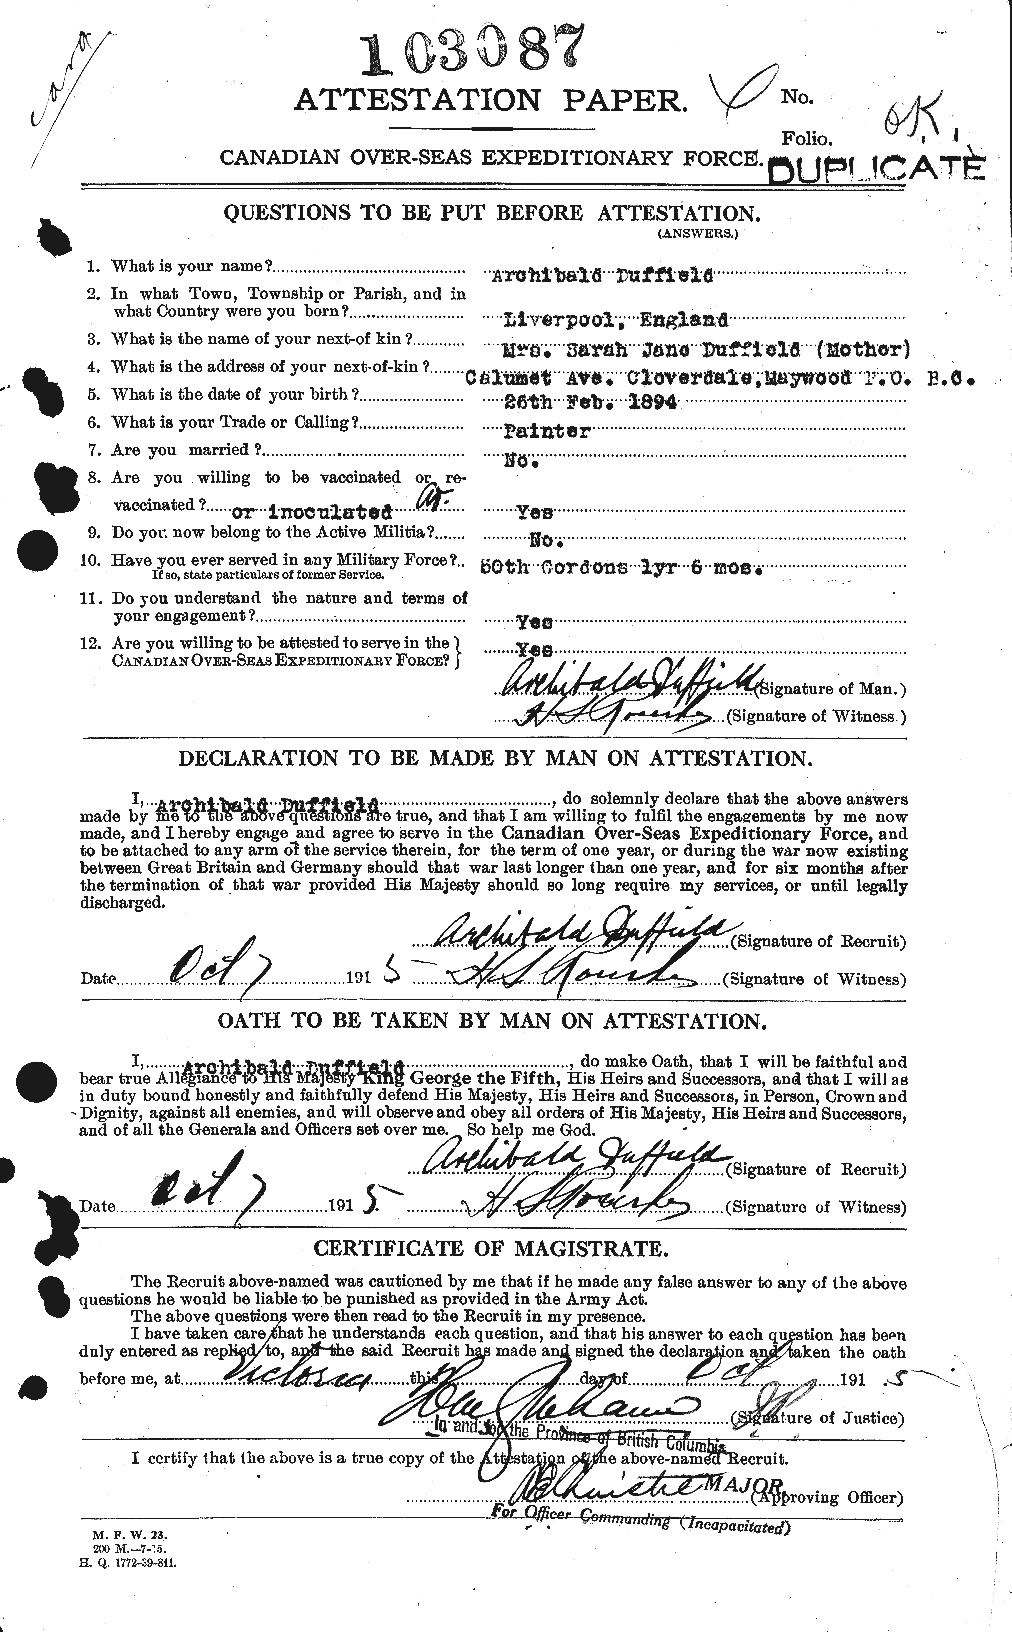 Personnel Records of the First World War - CEF 301217a